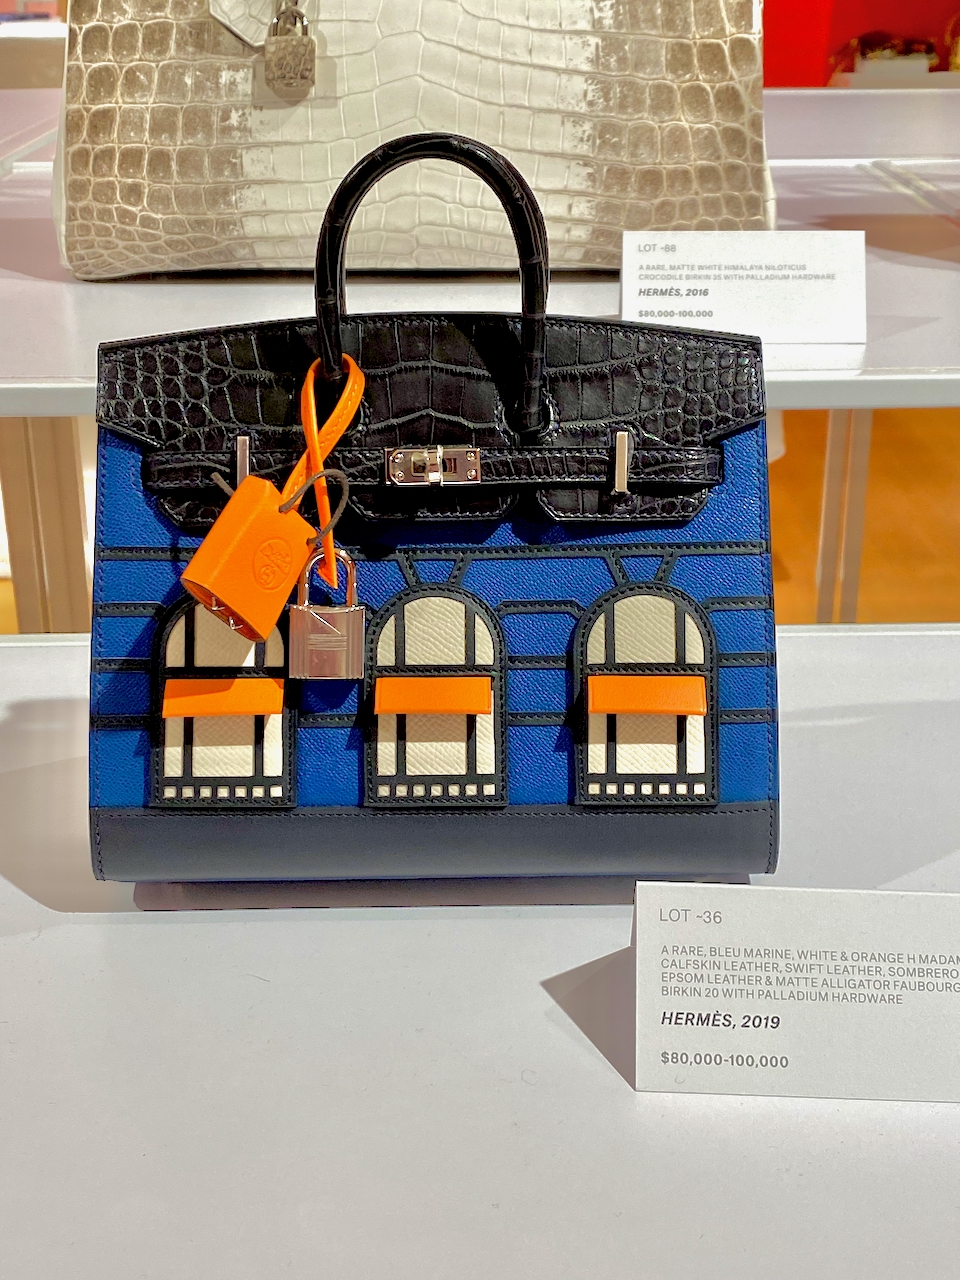 Birkin bags hit record prices even as the world ground to a halt